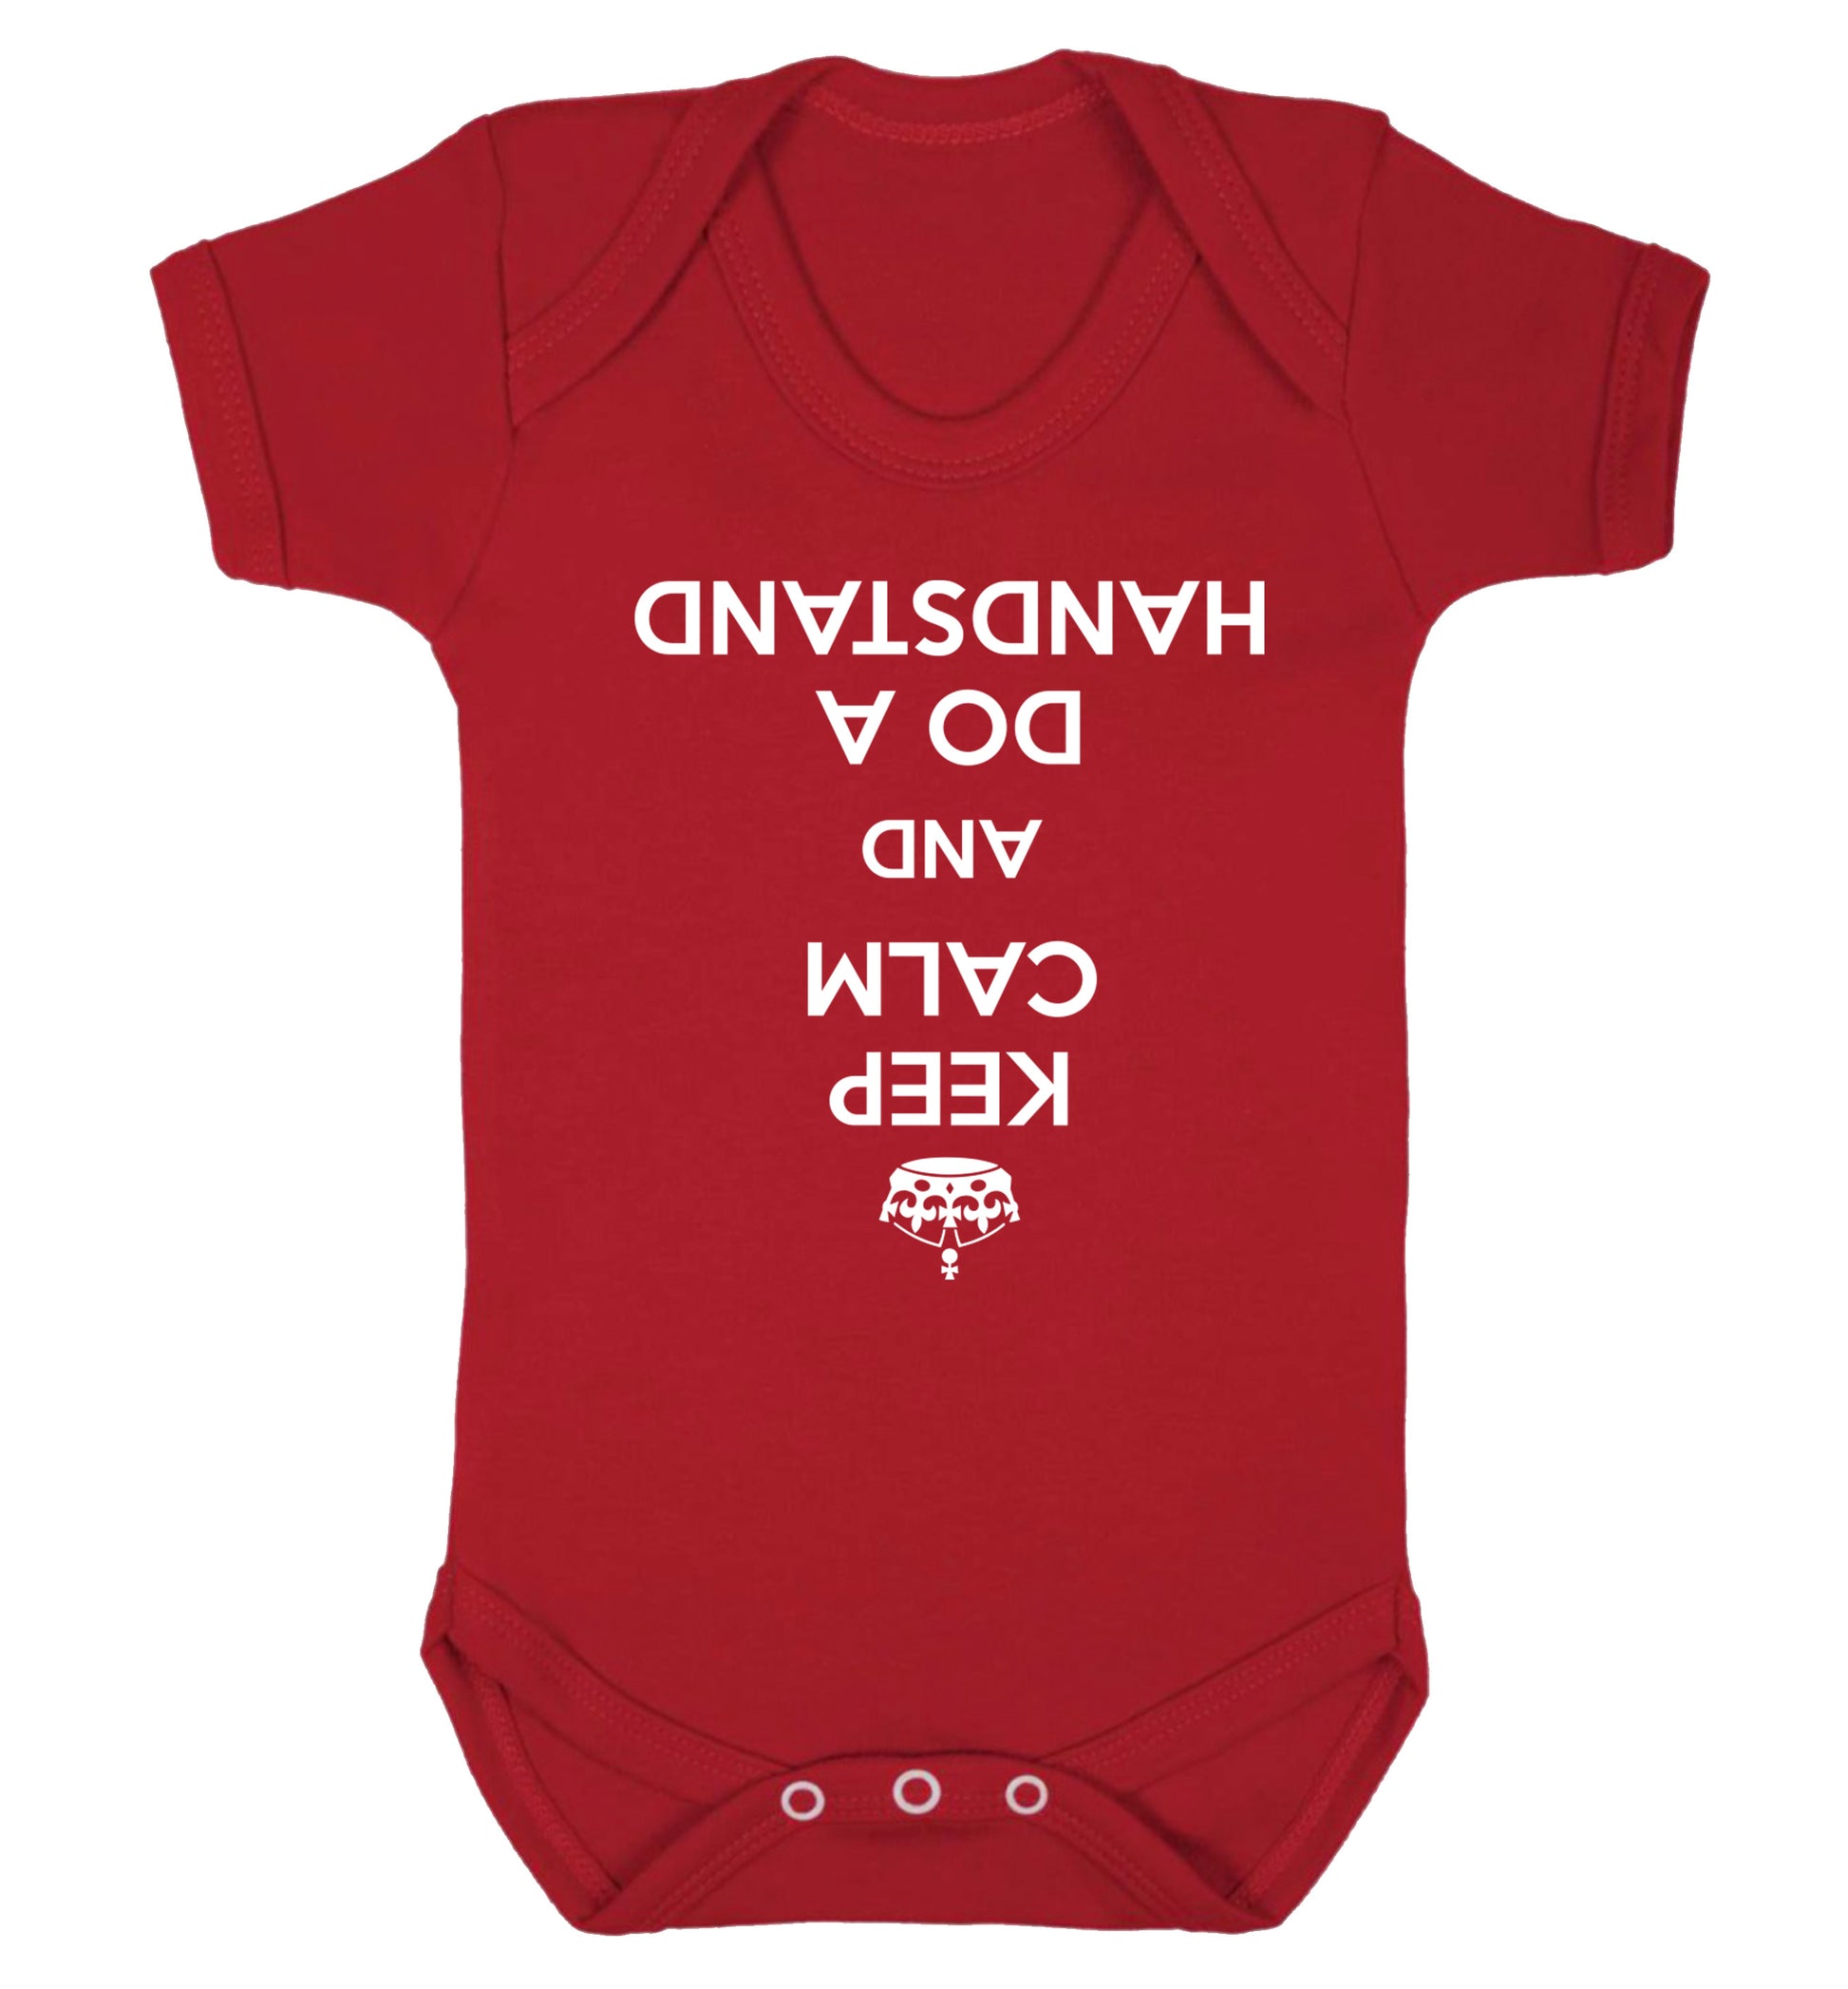 Keep calm and do a handstand Baby Vest red 18-24 months